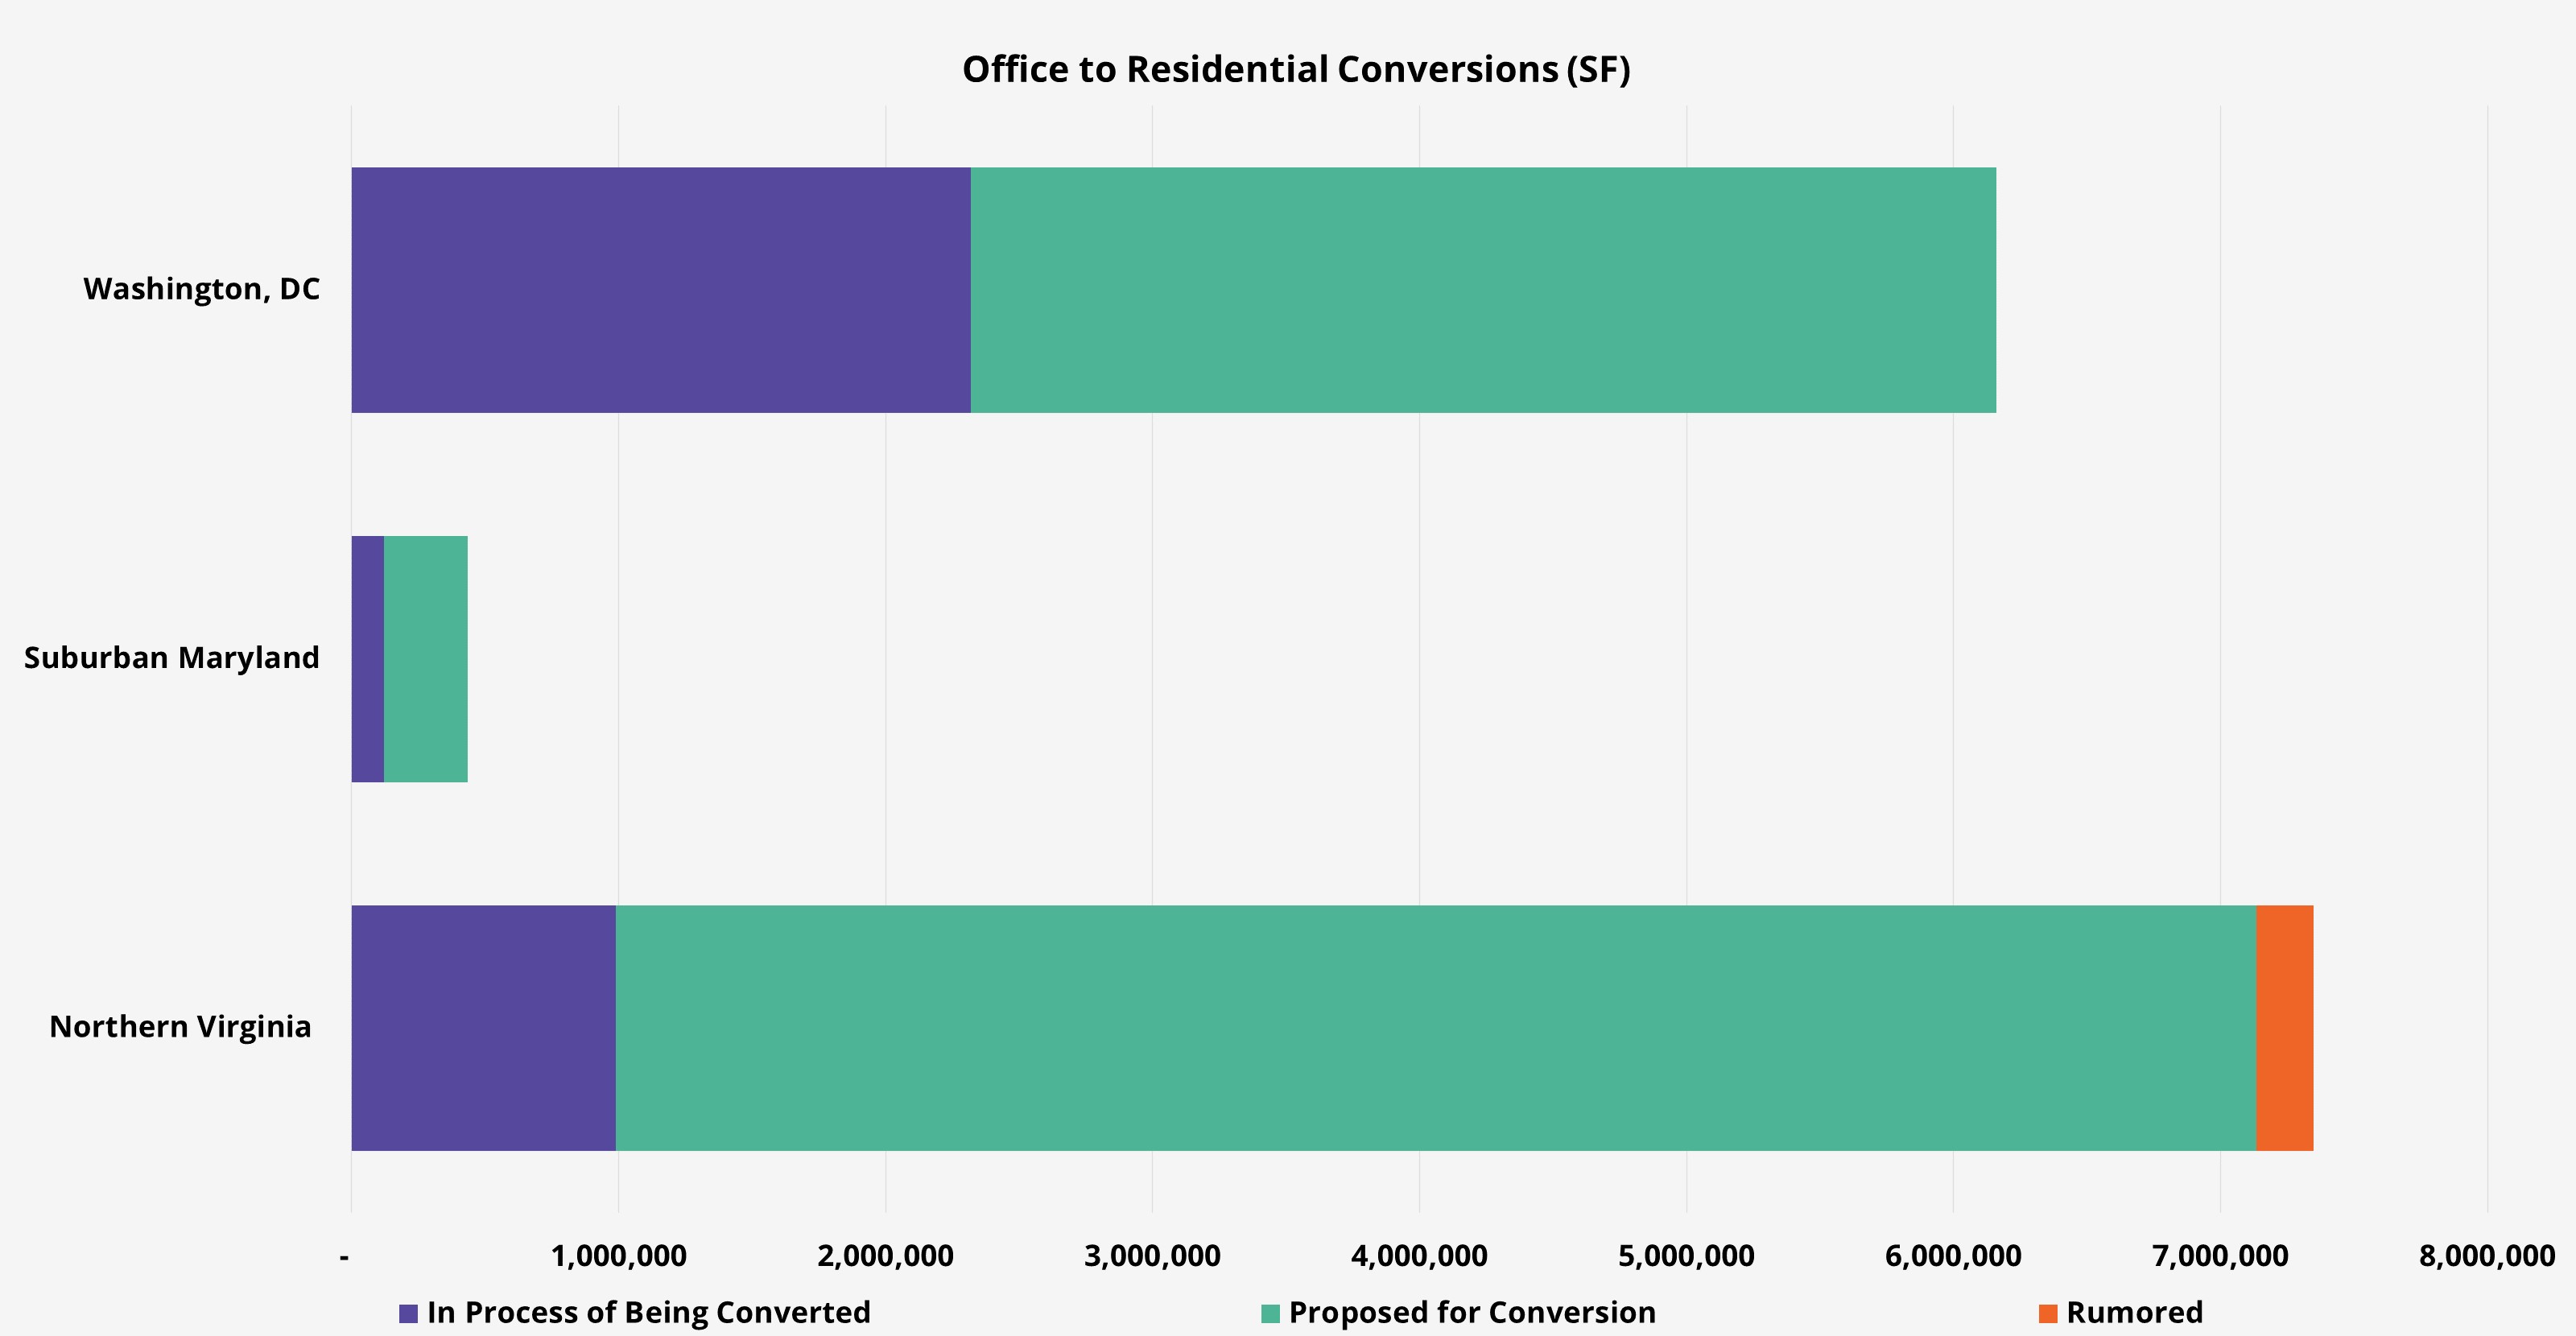 Bar graph displaying office to residential conversion square footage throughout Washington, DC, Suburban Maryland, and Northern Virginia